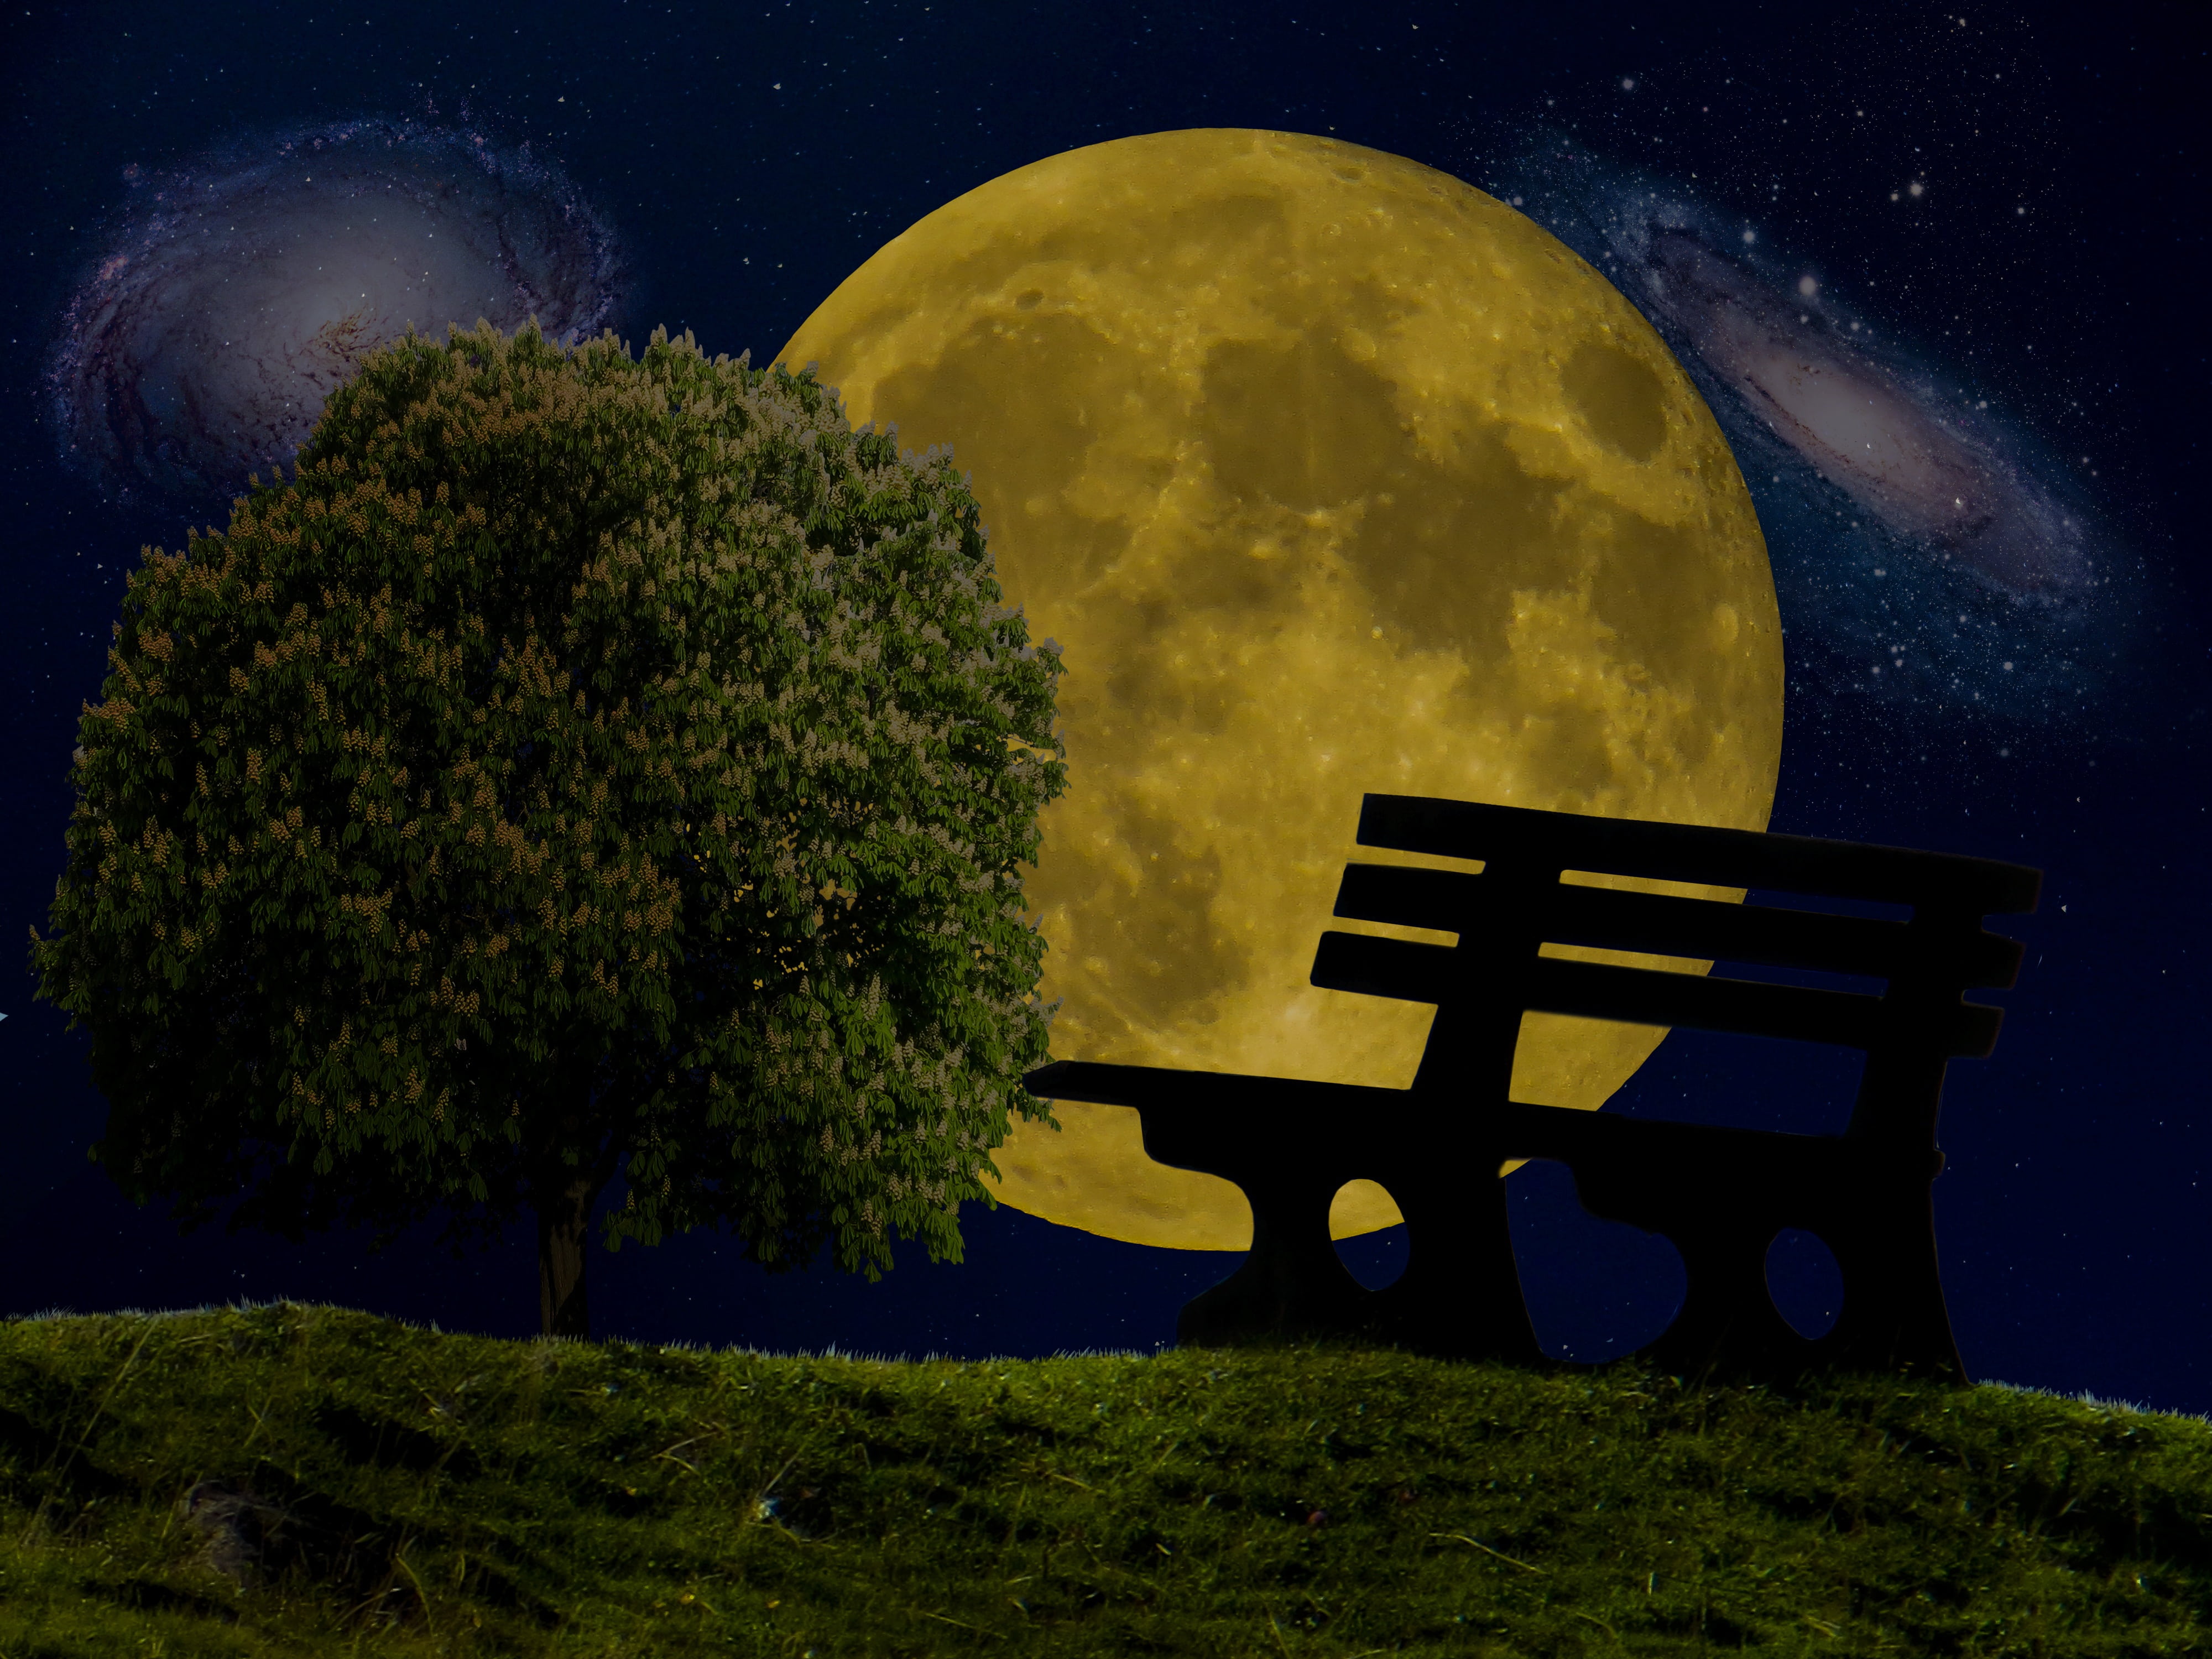 silhouette of bench near tree during nighttime, moon, star, universe